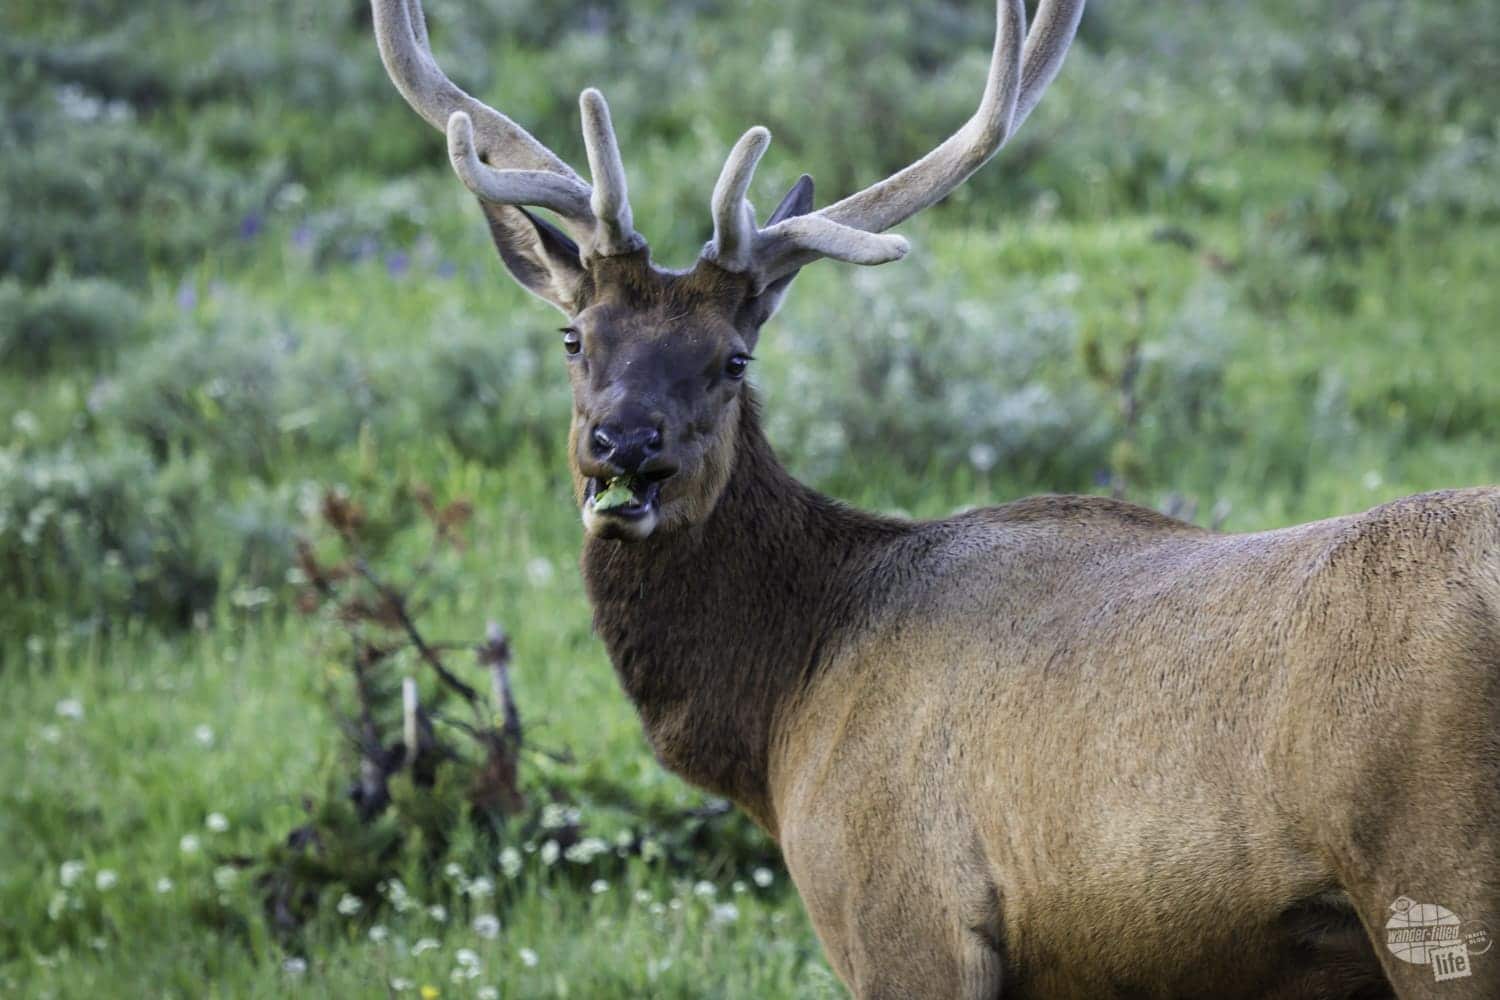 Bull Elk just south of Canyon Village in Yellowstone National Park